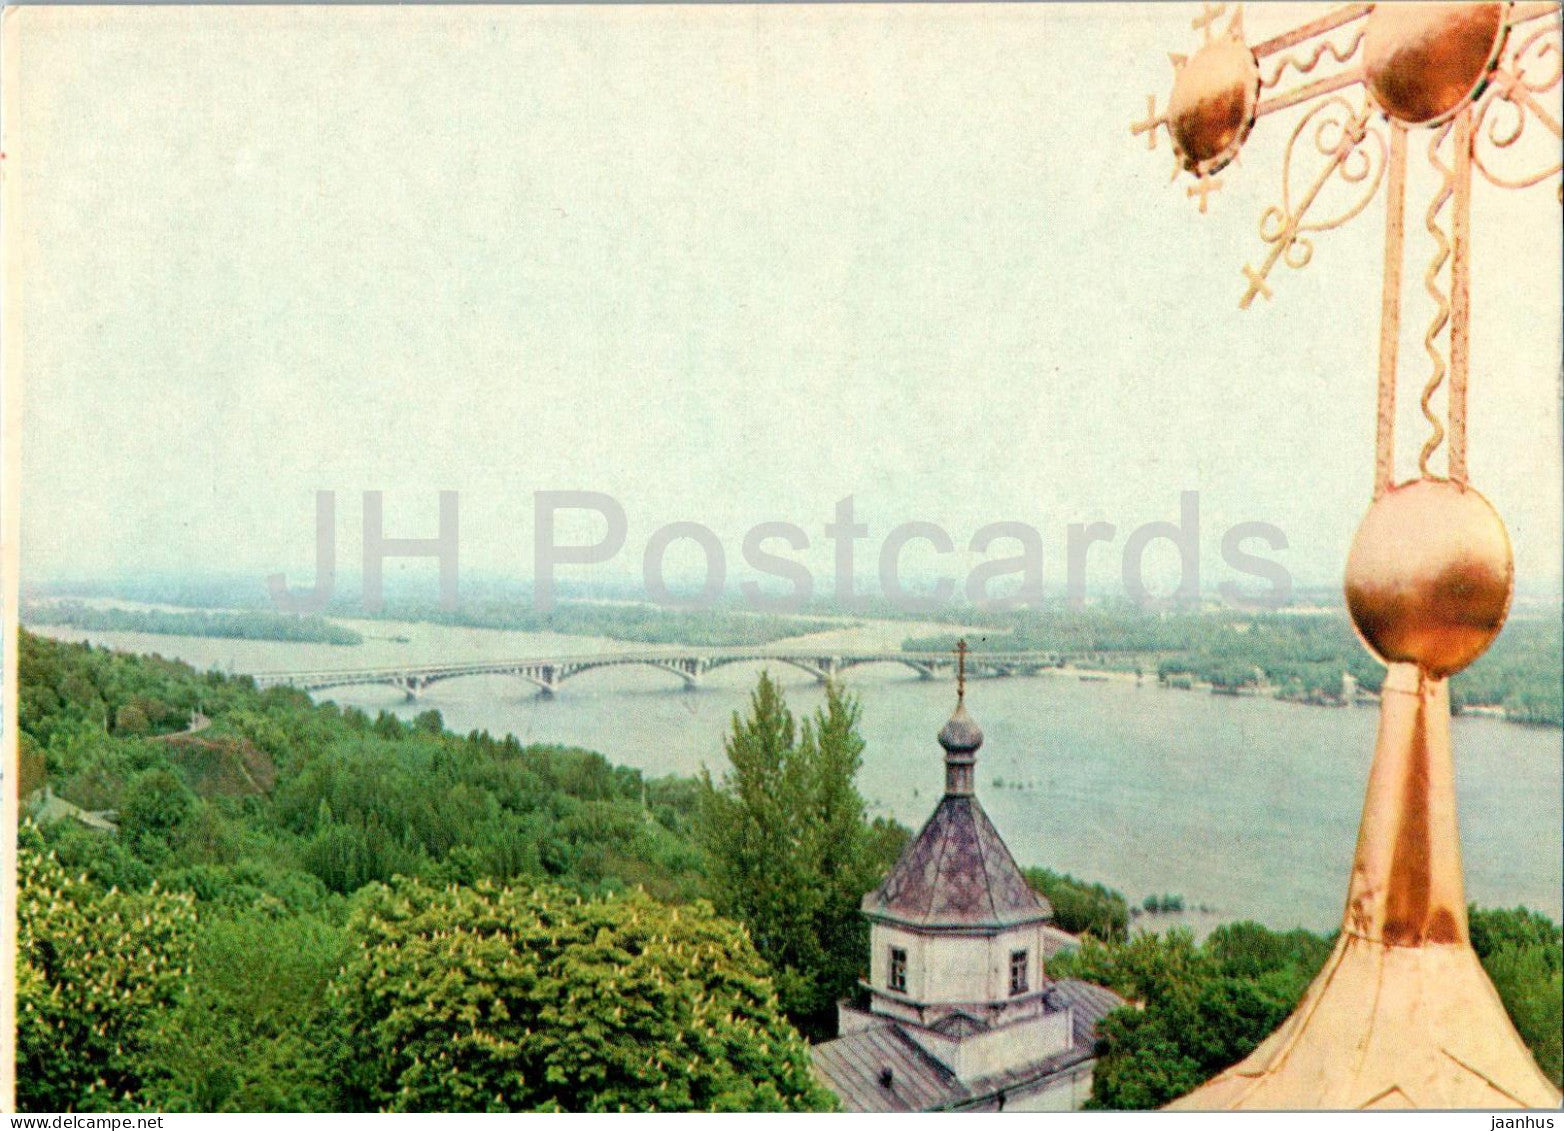 Kyiv Pechersk Lavra - View of the Far Caves - The Church of the Conception of St Anna - 1978 - Ukraine USSR - unused - JH Postcards